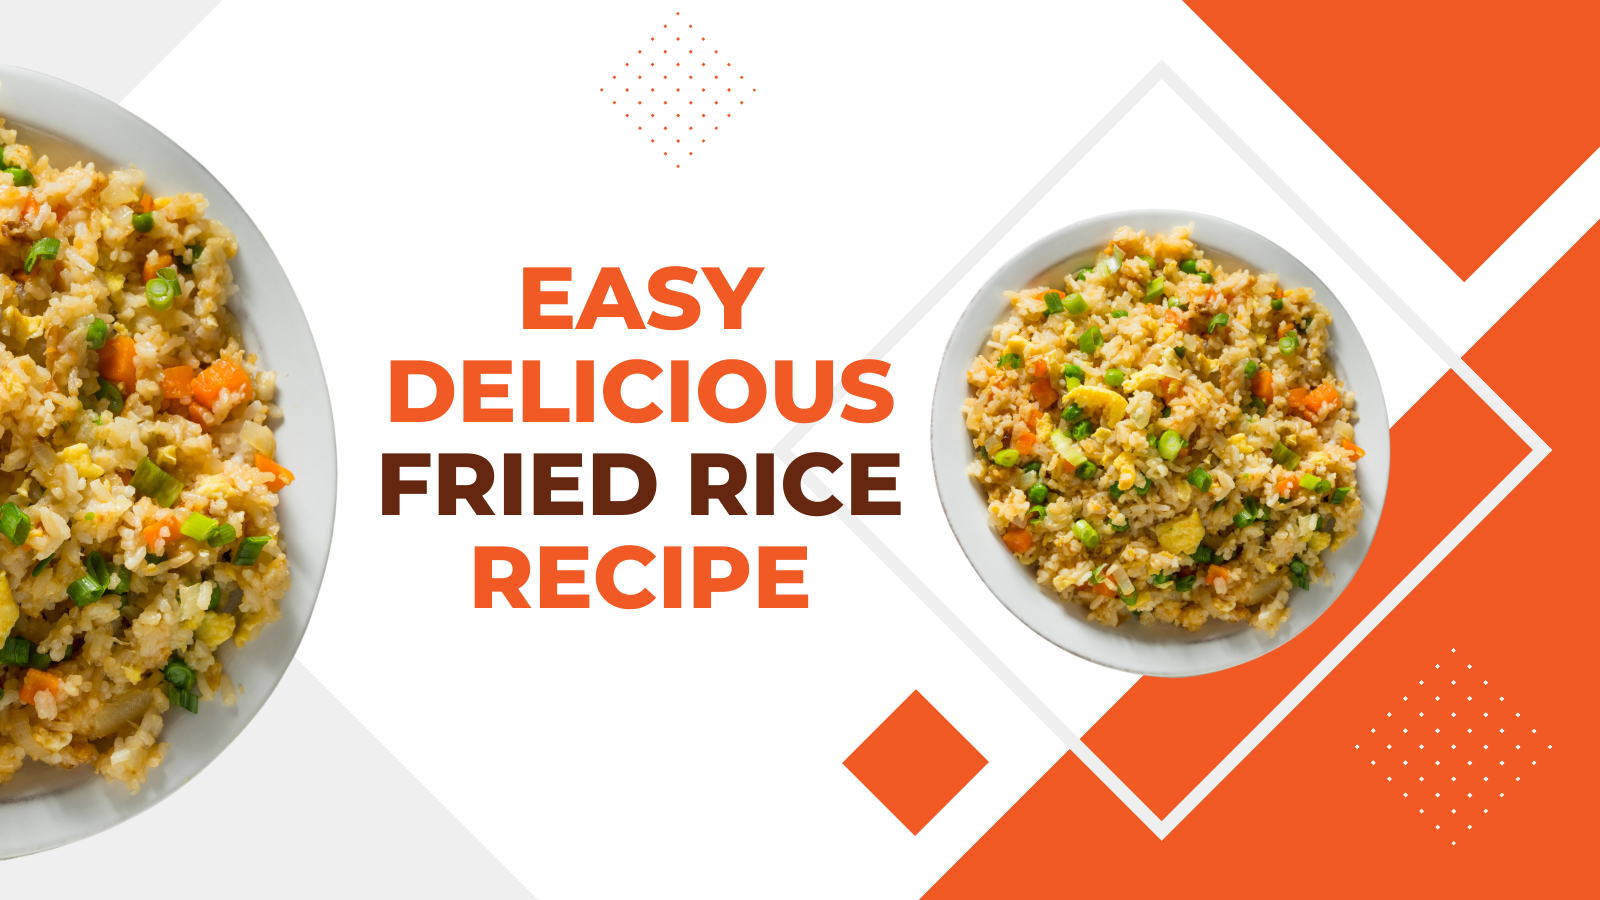 Easy Delicious Fried Rice Recipe